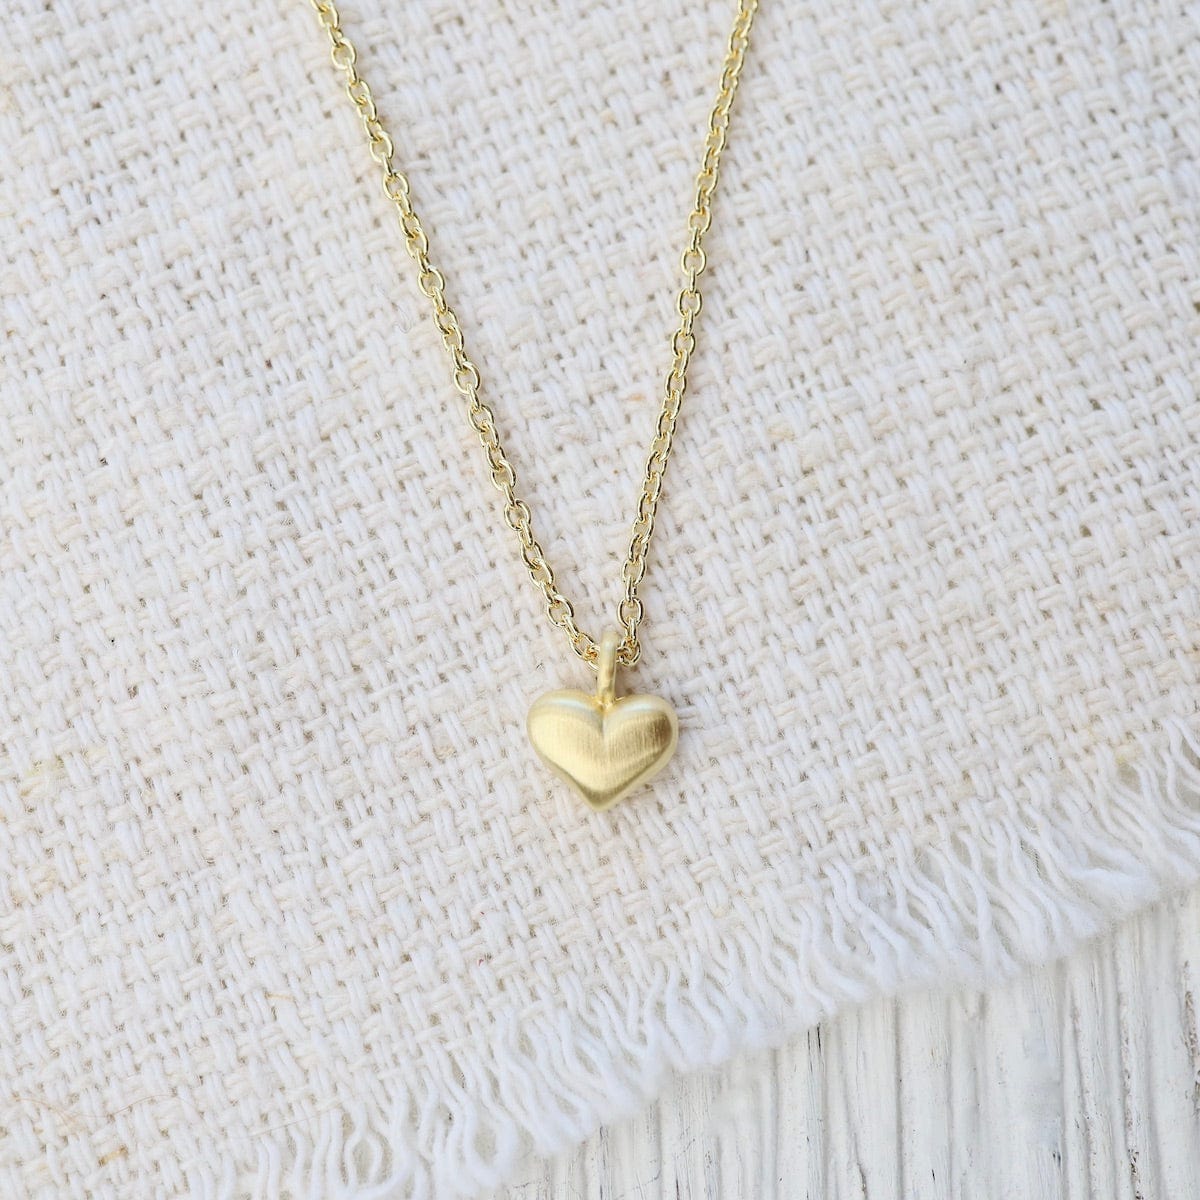 NKL-VRM Puffy Heart Necklace In Brushed Gold Vermeil